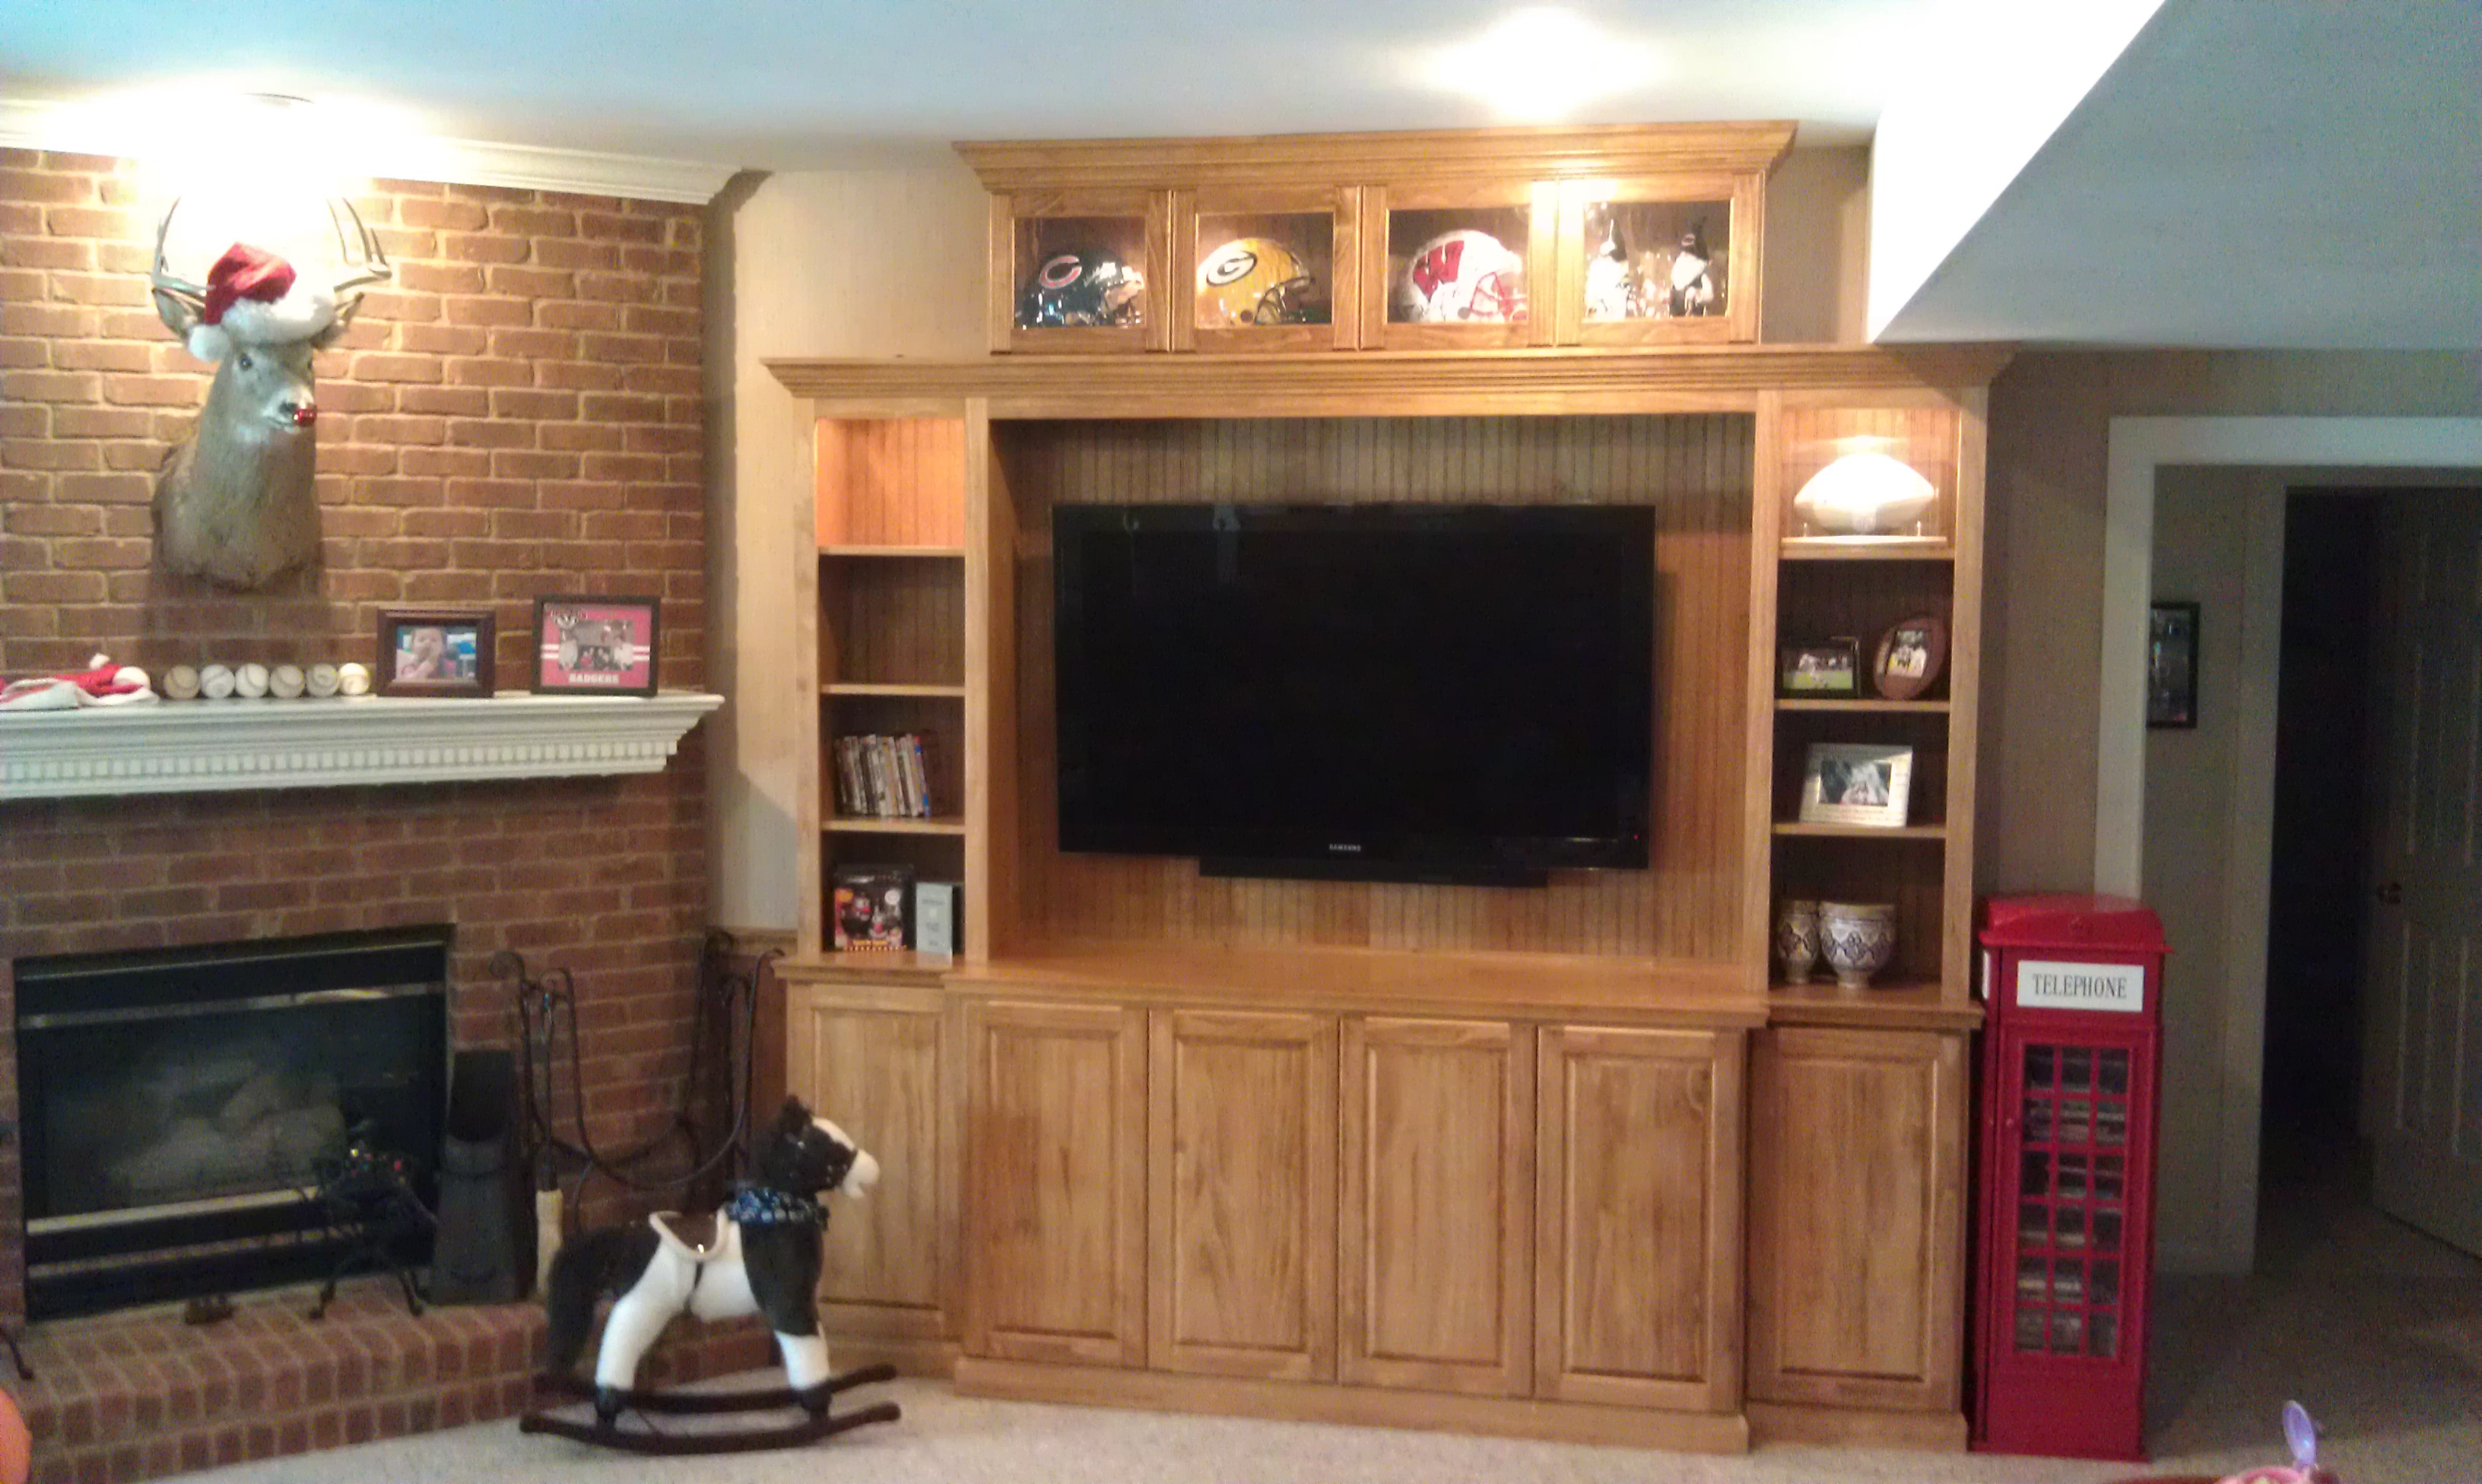 Custom Pine Entertainment Center by Ryan Bruzan In Glenmary, Louisville, KY. Finish with clear coat lacquer.